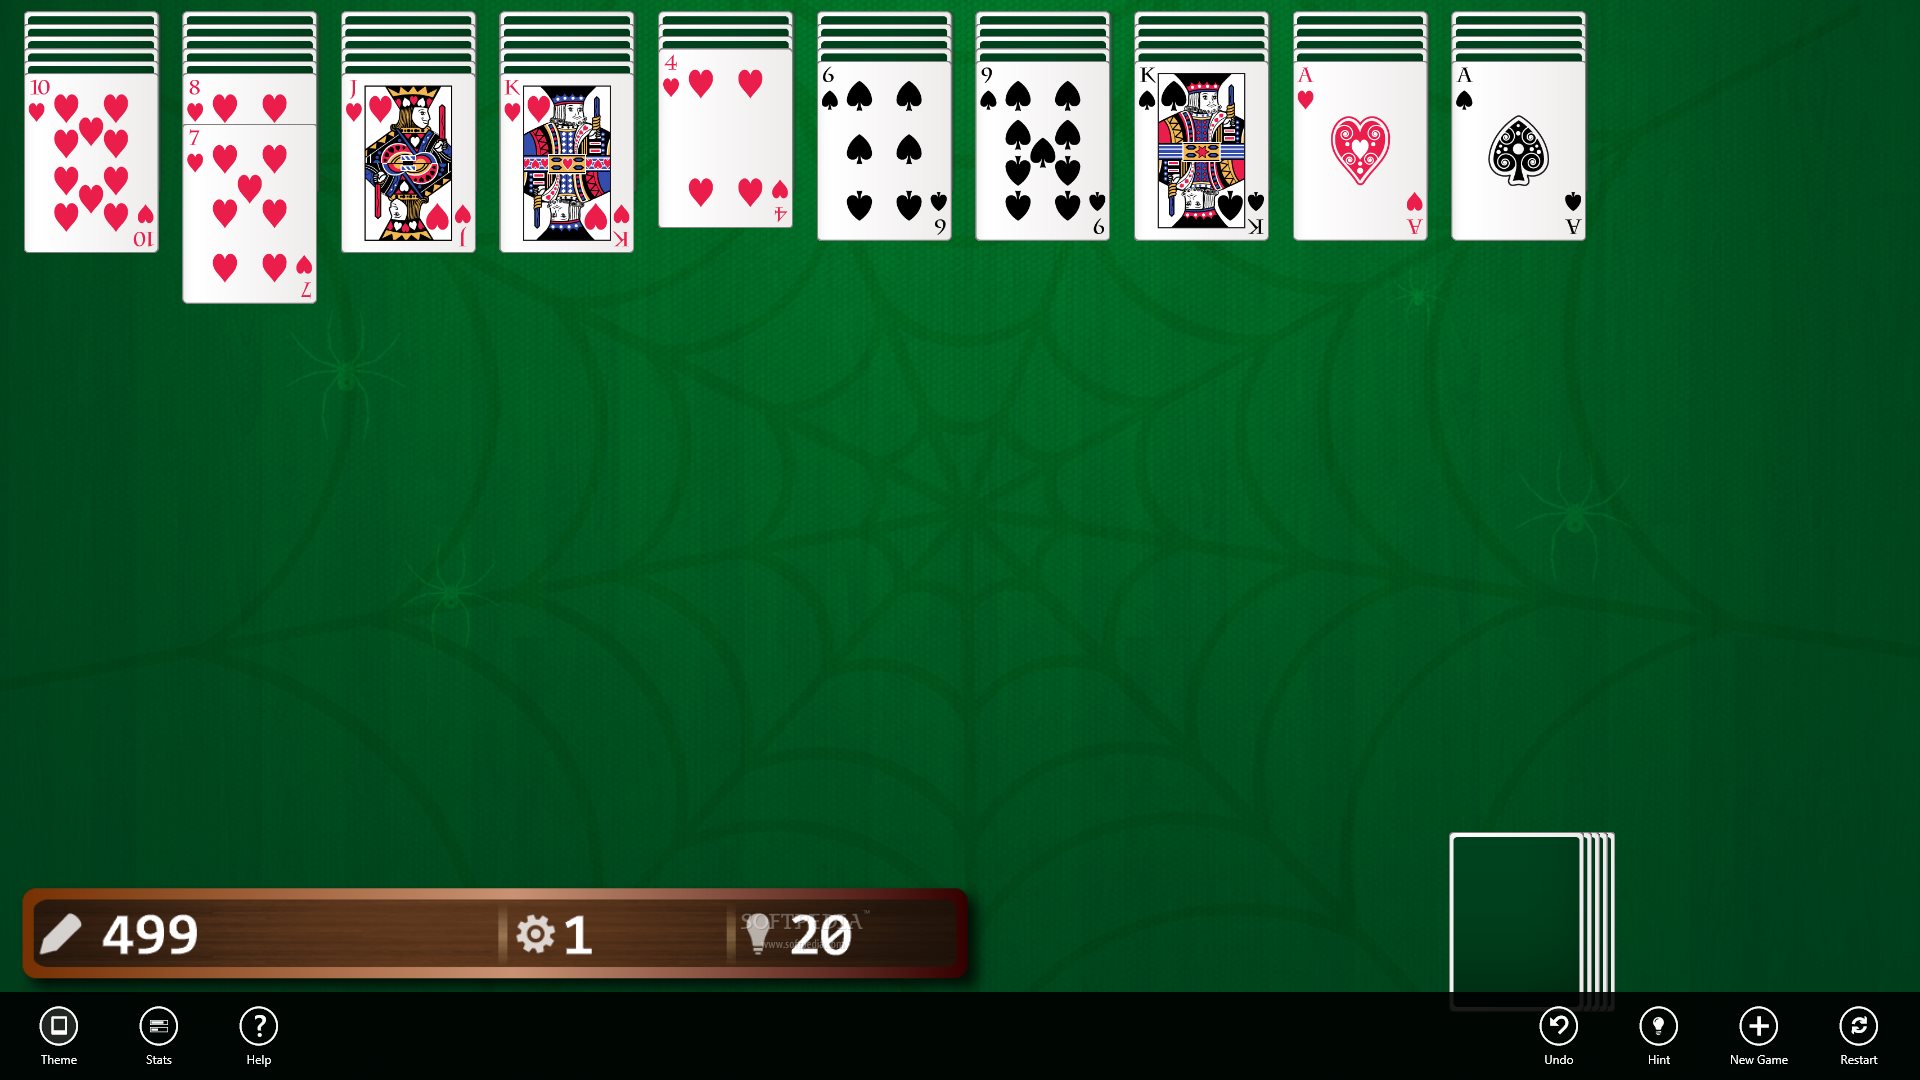 does windows 10 have spider solitaire